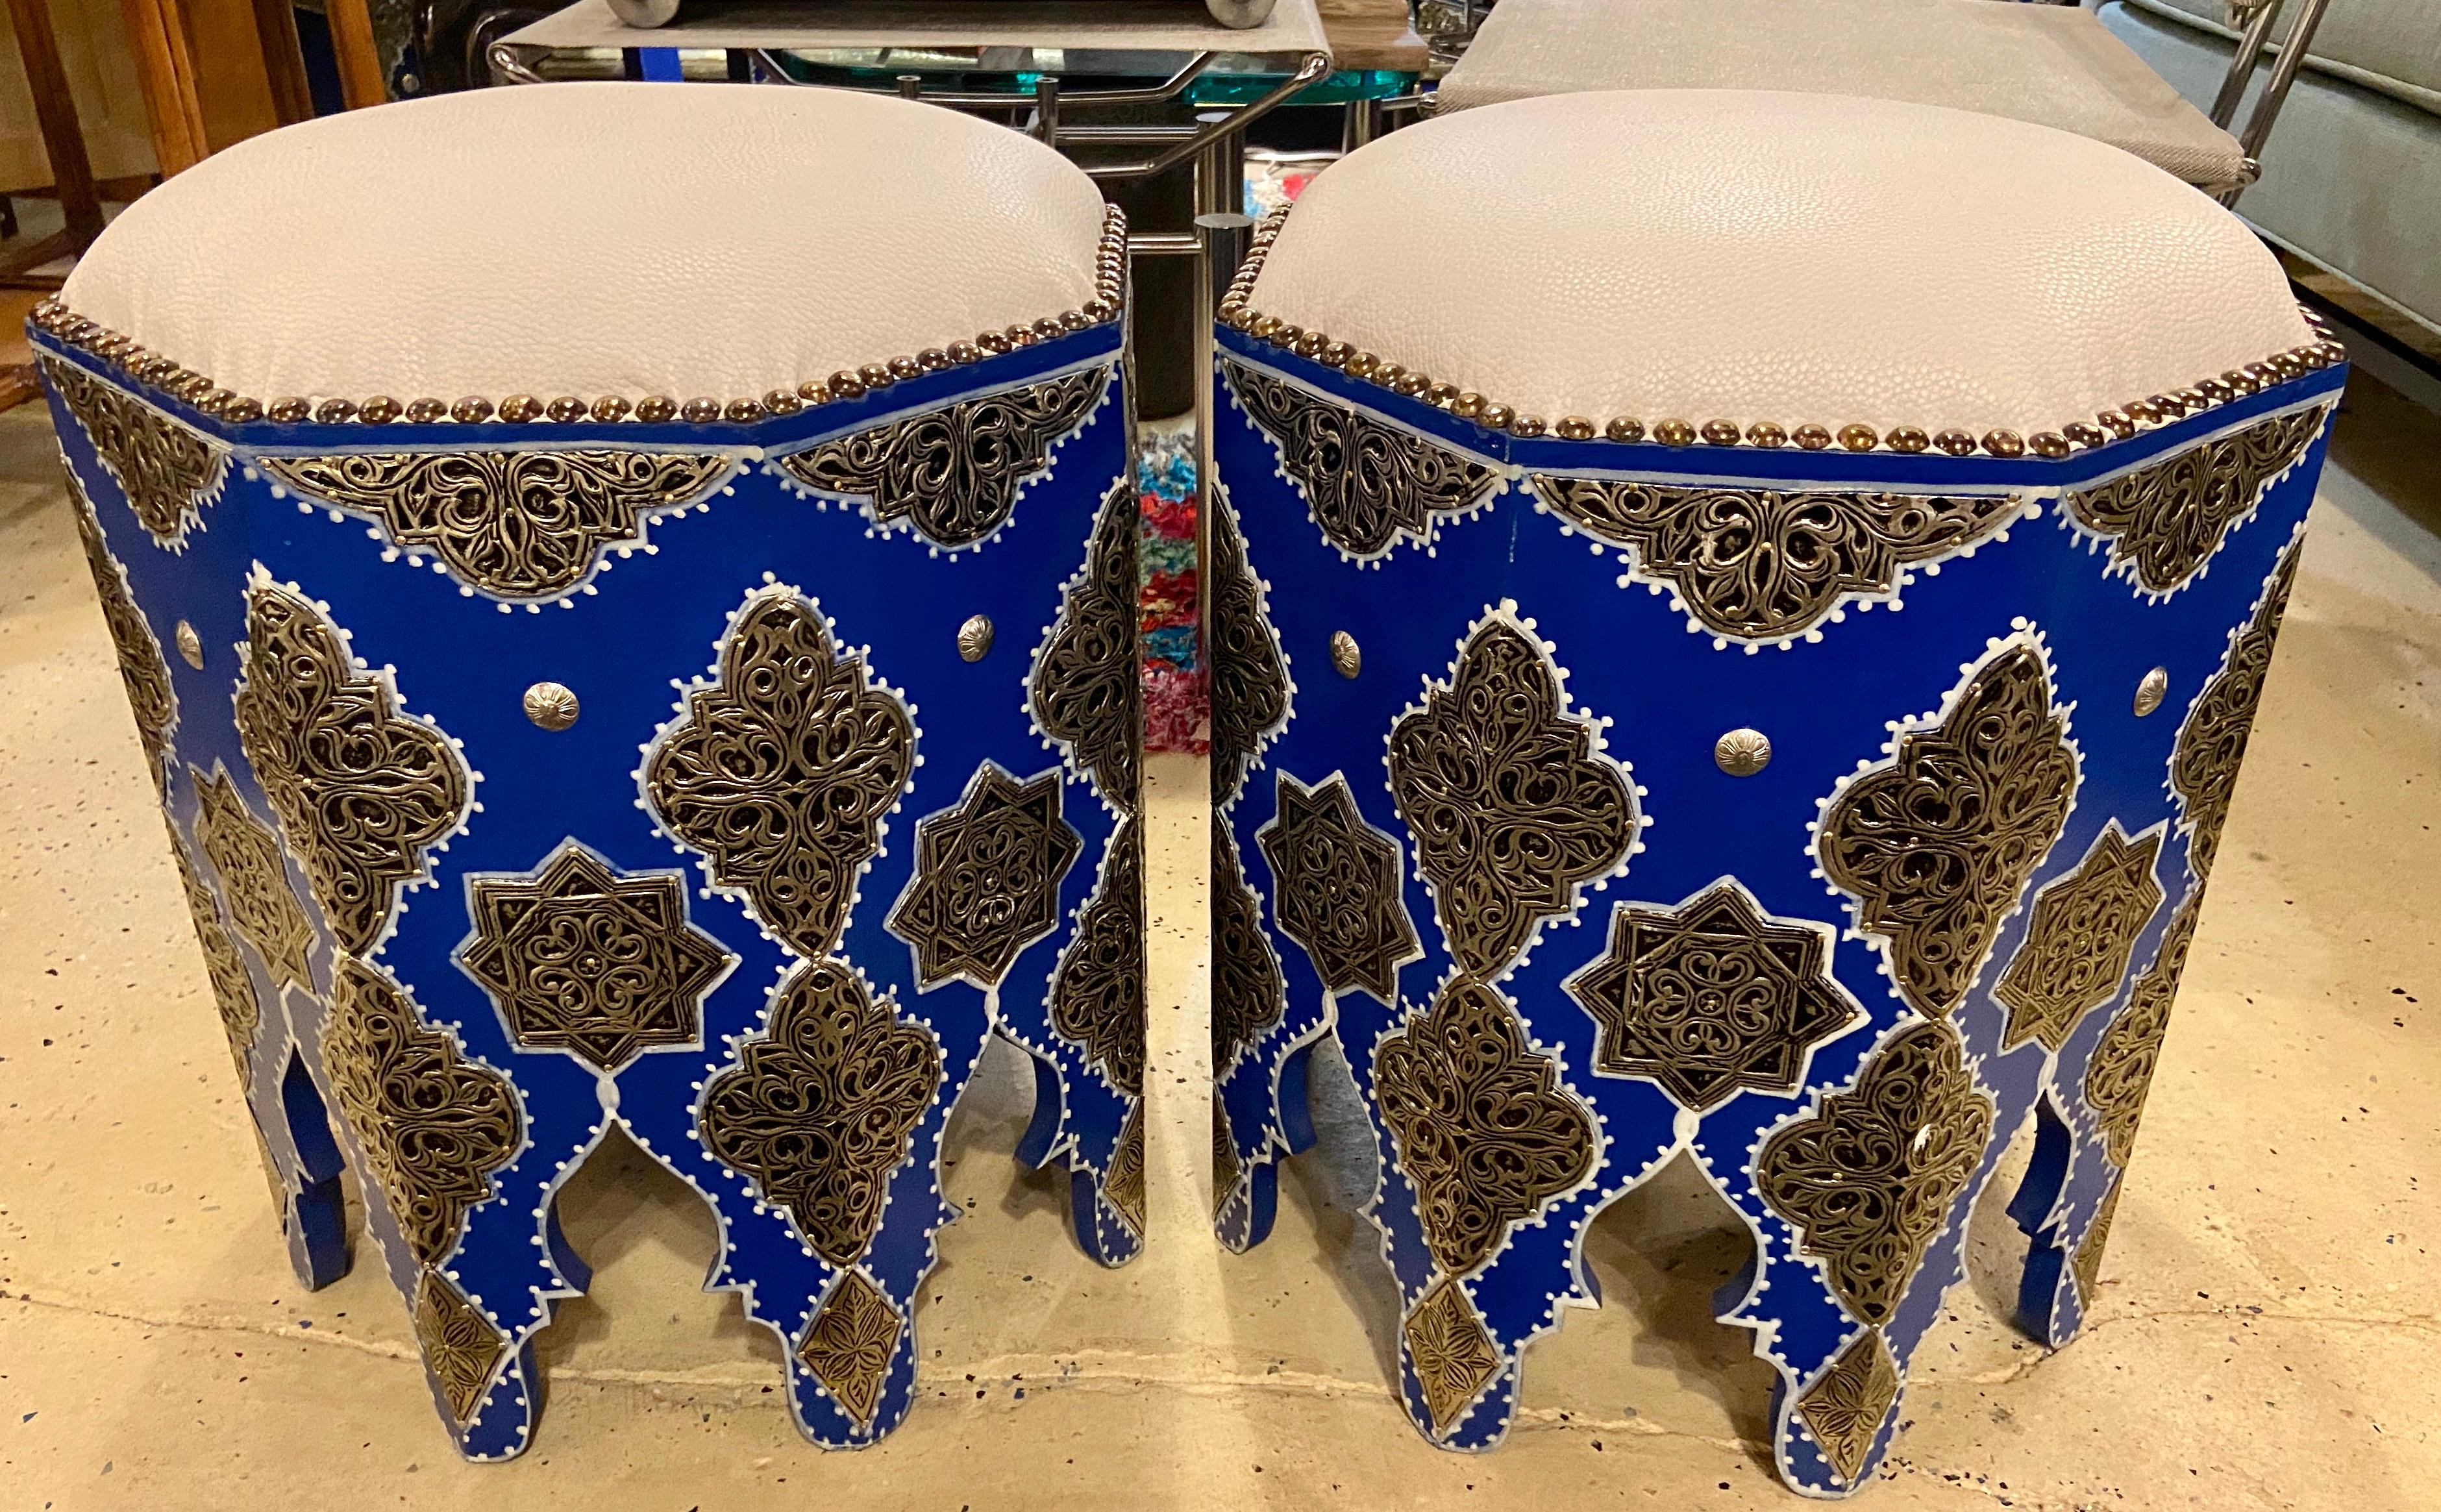 Moroccan Blue Stool or Ottoman with White Leather Top, a Pair  
This exquisite pair of handmade Moroccan stools will add unique style and sophistication to any room. The pair is hand painted blue and features expert silver metal filigree work and